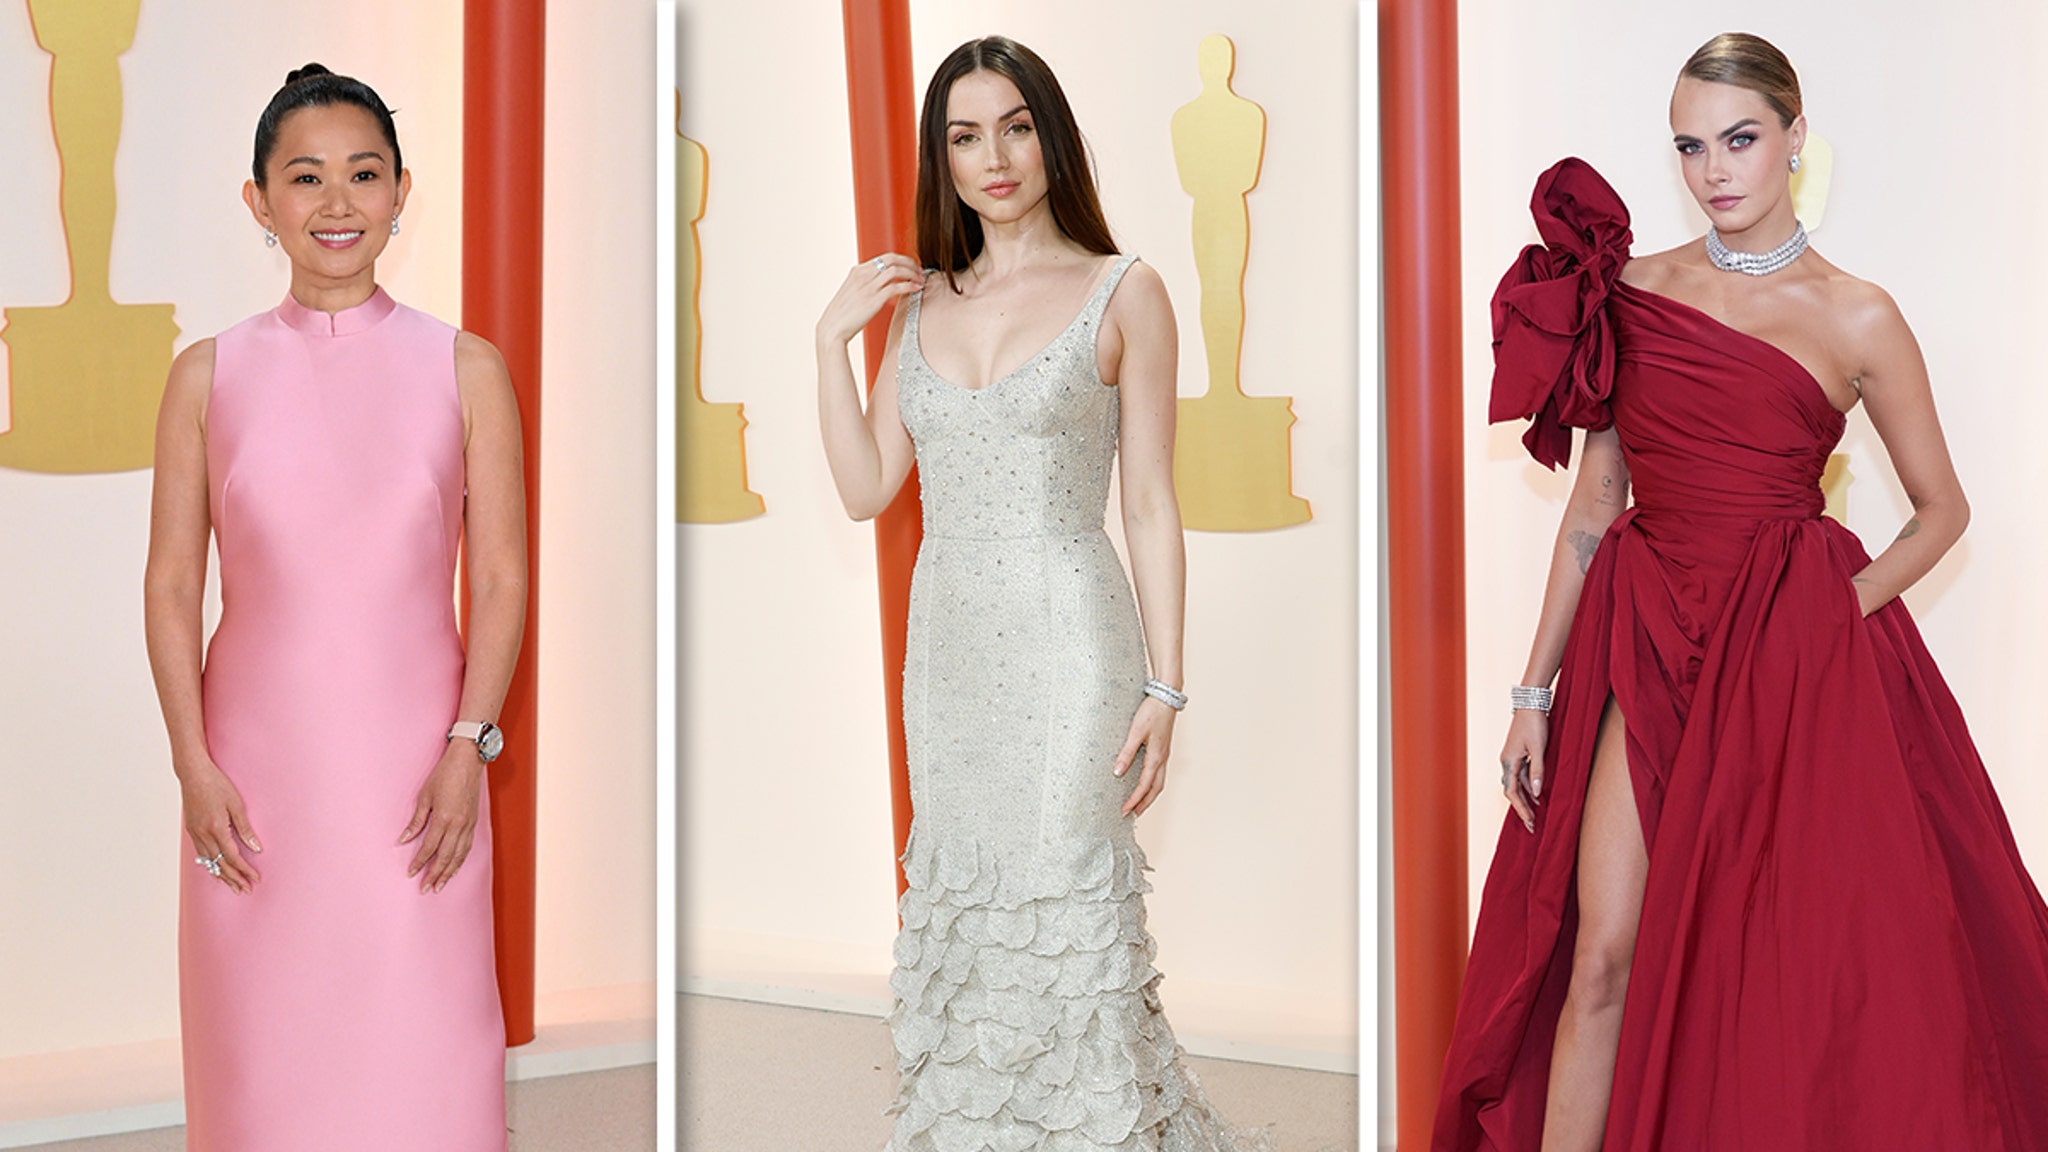 Hollywood’s biggest stars arrive in dazzling outfits at the 2023 Academy Awards